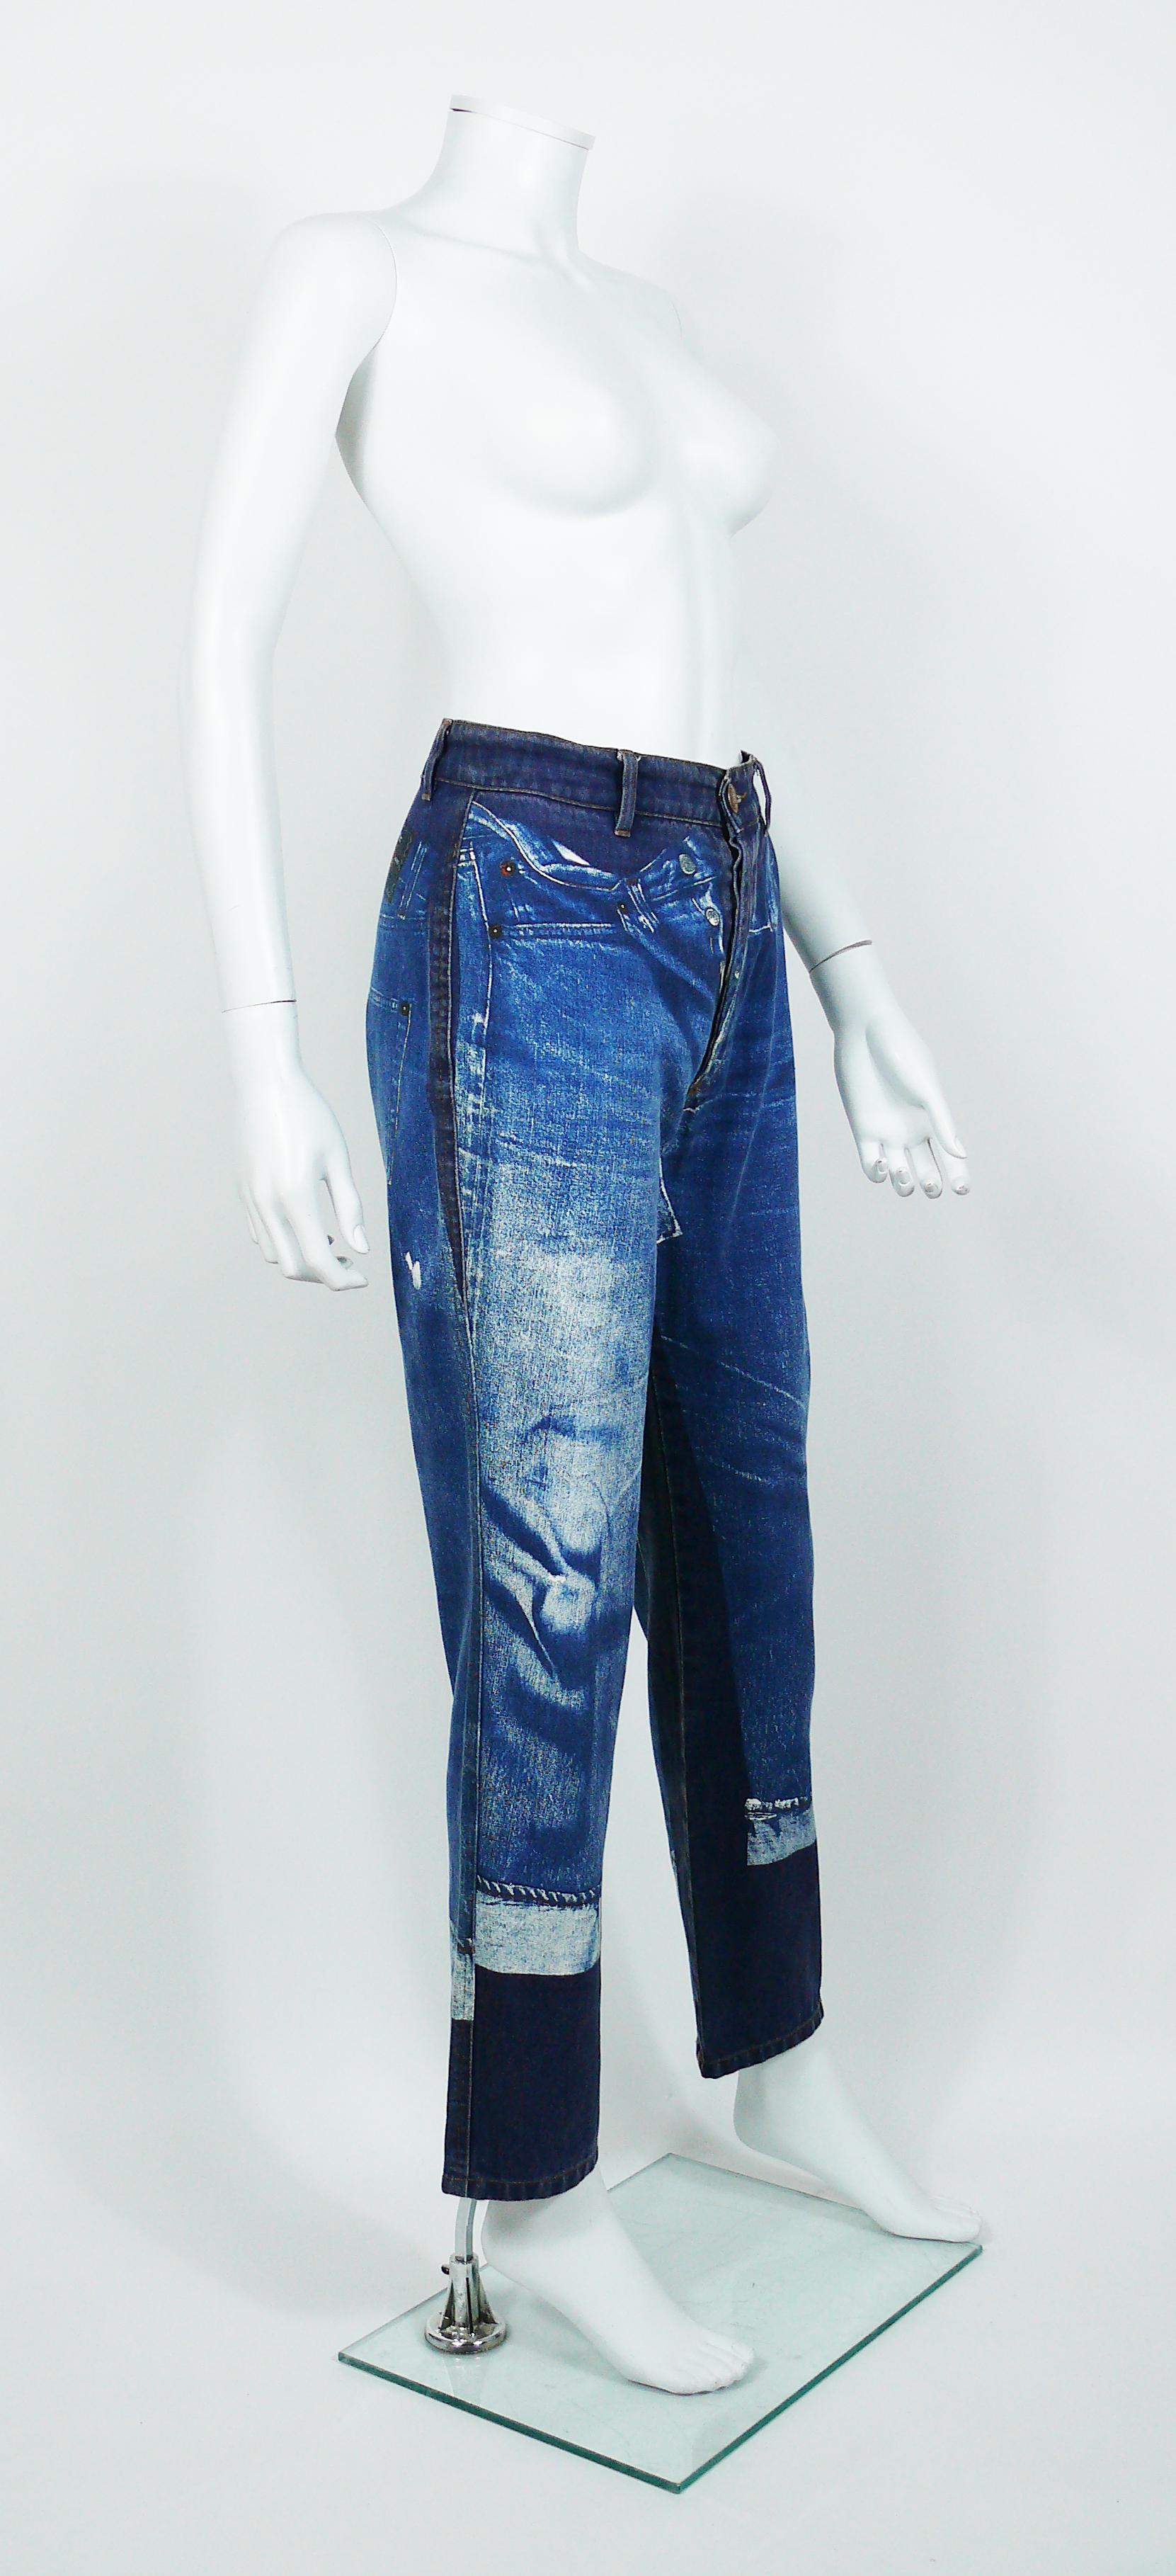 JEAN PAUL GAULTIER vintage denim pants trousers featuring an x-ray screen trompe l’œil jeans on front and back.

These trousers feature :
- Distressed blue-purple denim jeans featuring blue-white x-ray screen trompe l’œil jeans on front and back.
-